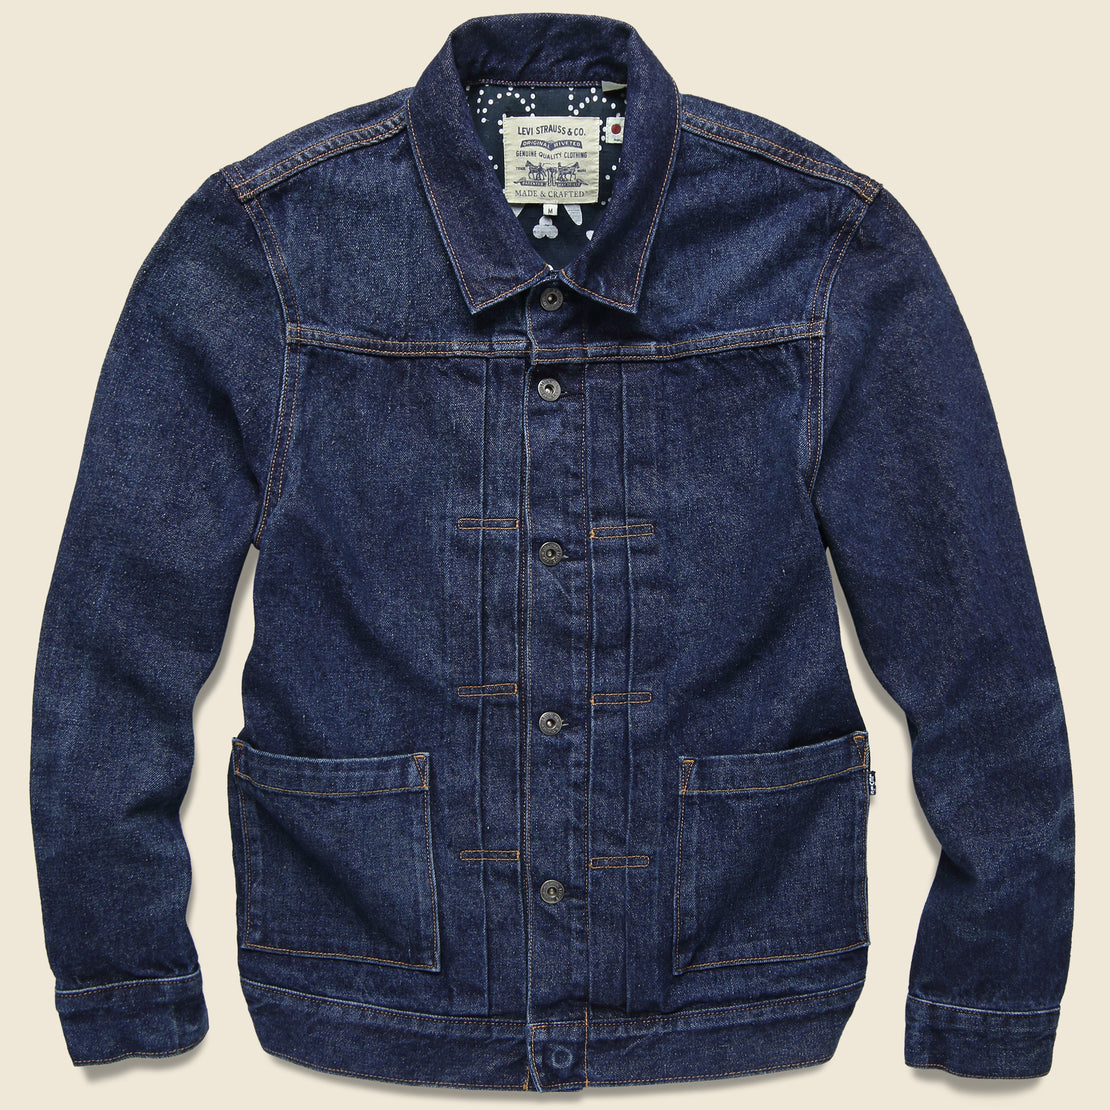 Levis Made & Crafted Type II Trucker Jacket - Neppy